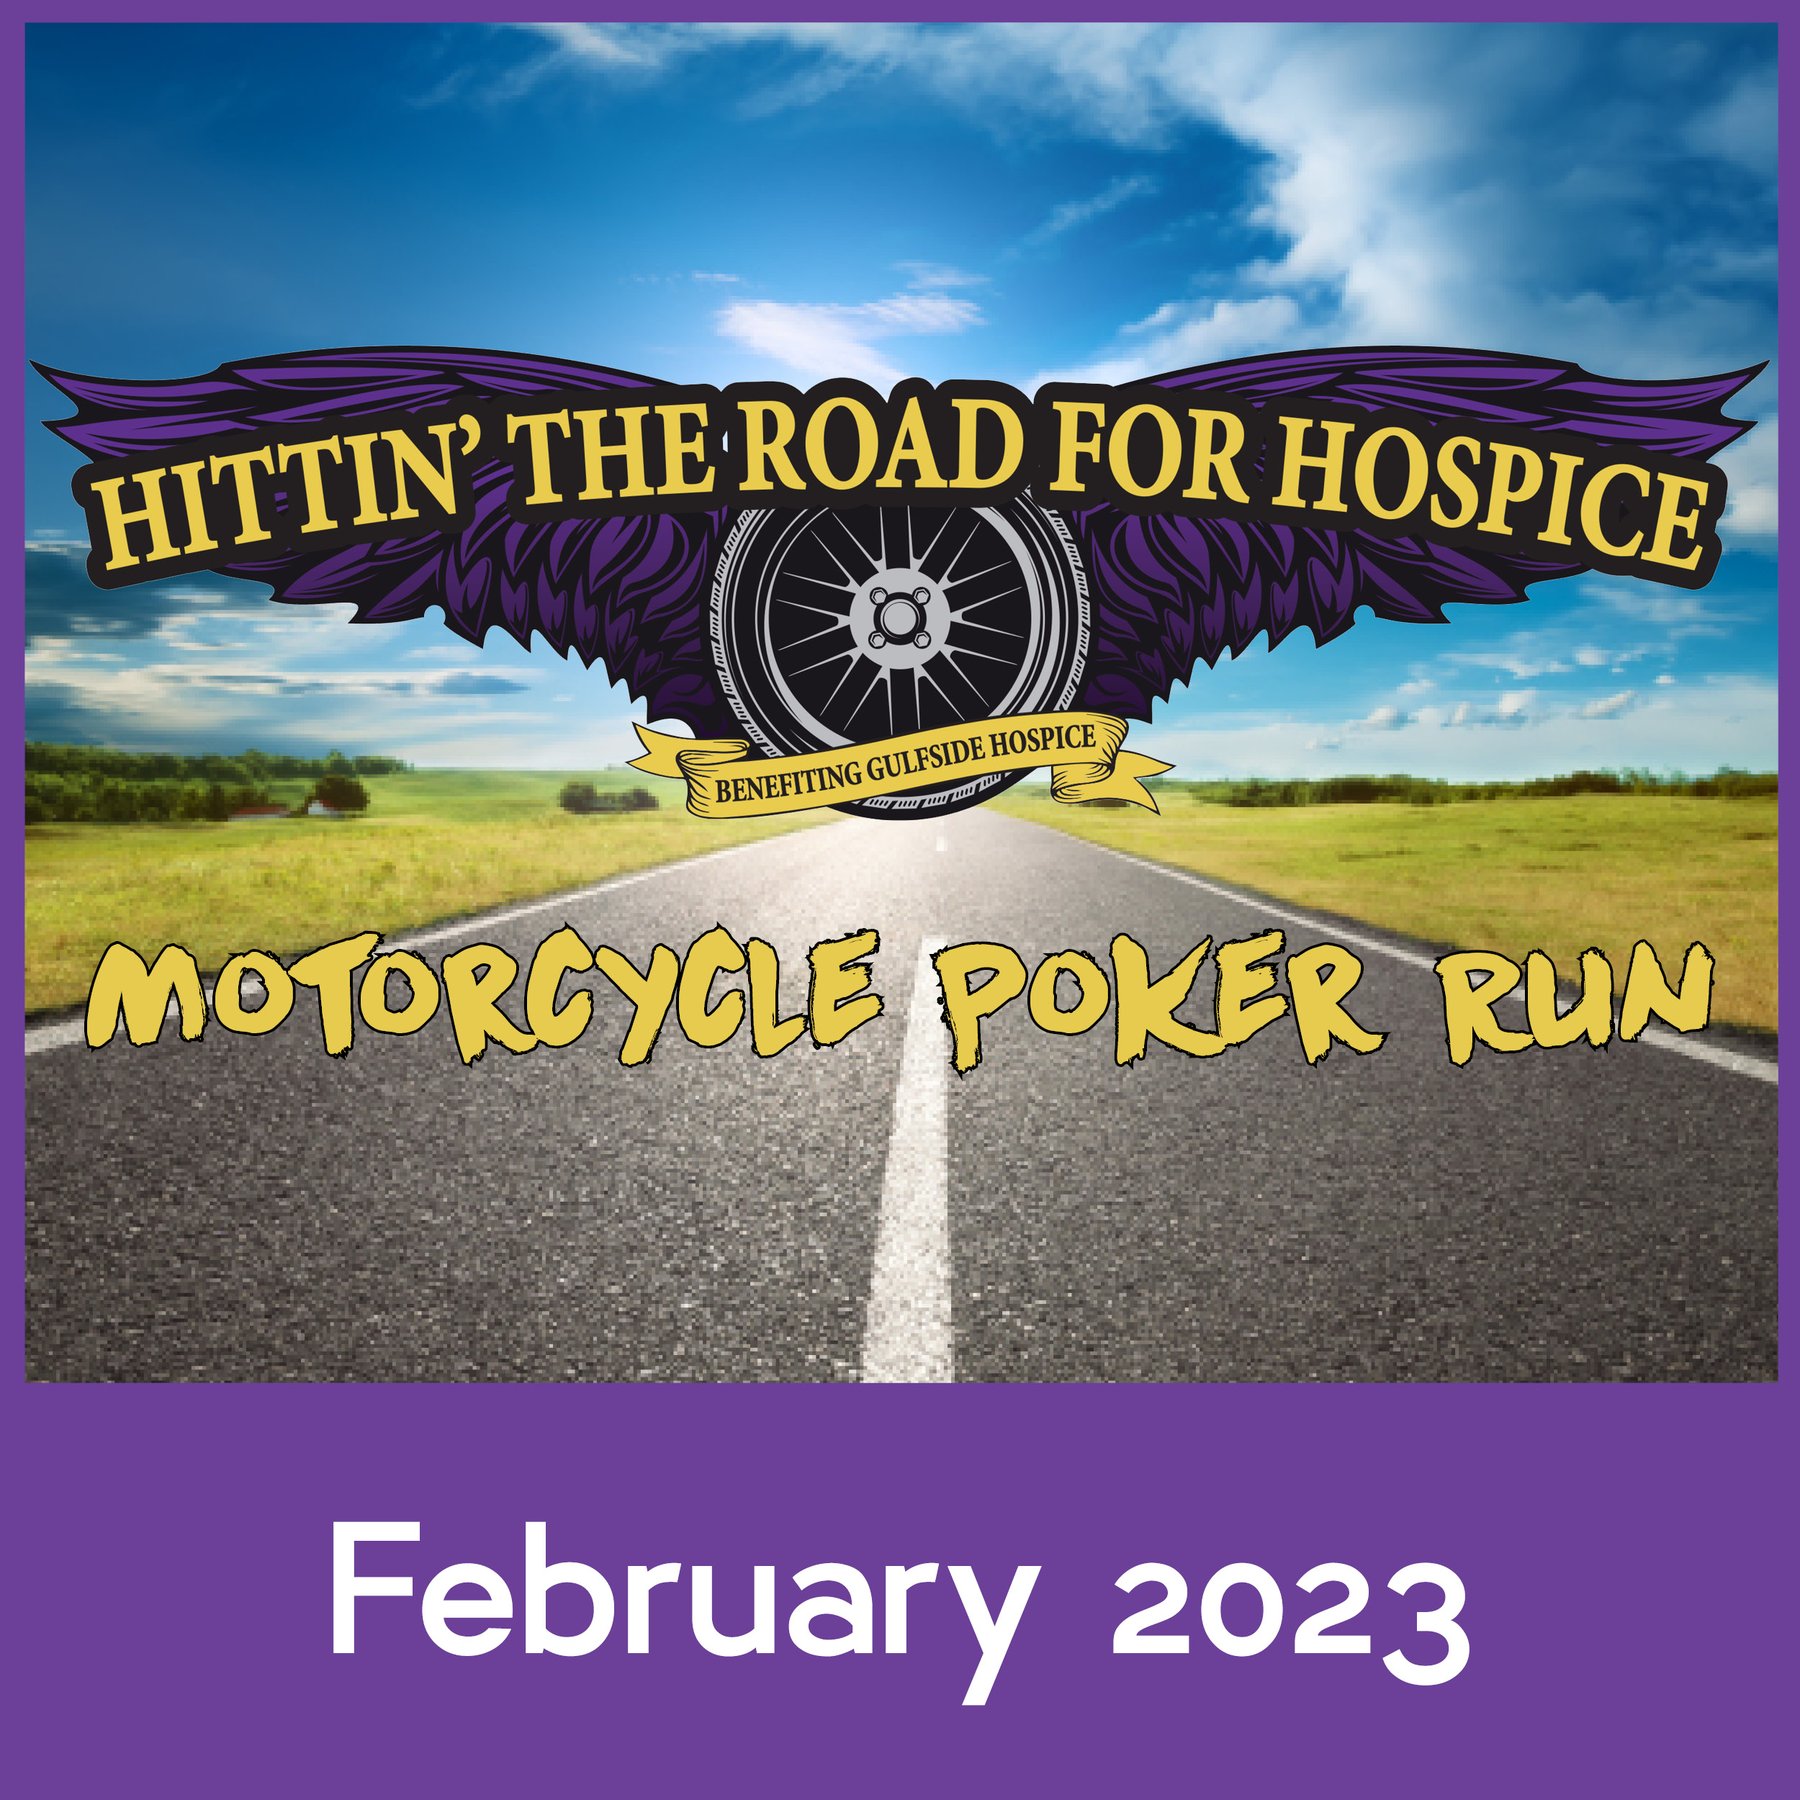 Hittin The Road for Hospice motorcycle poker run